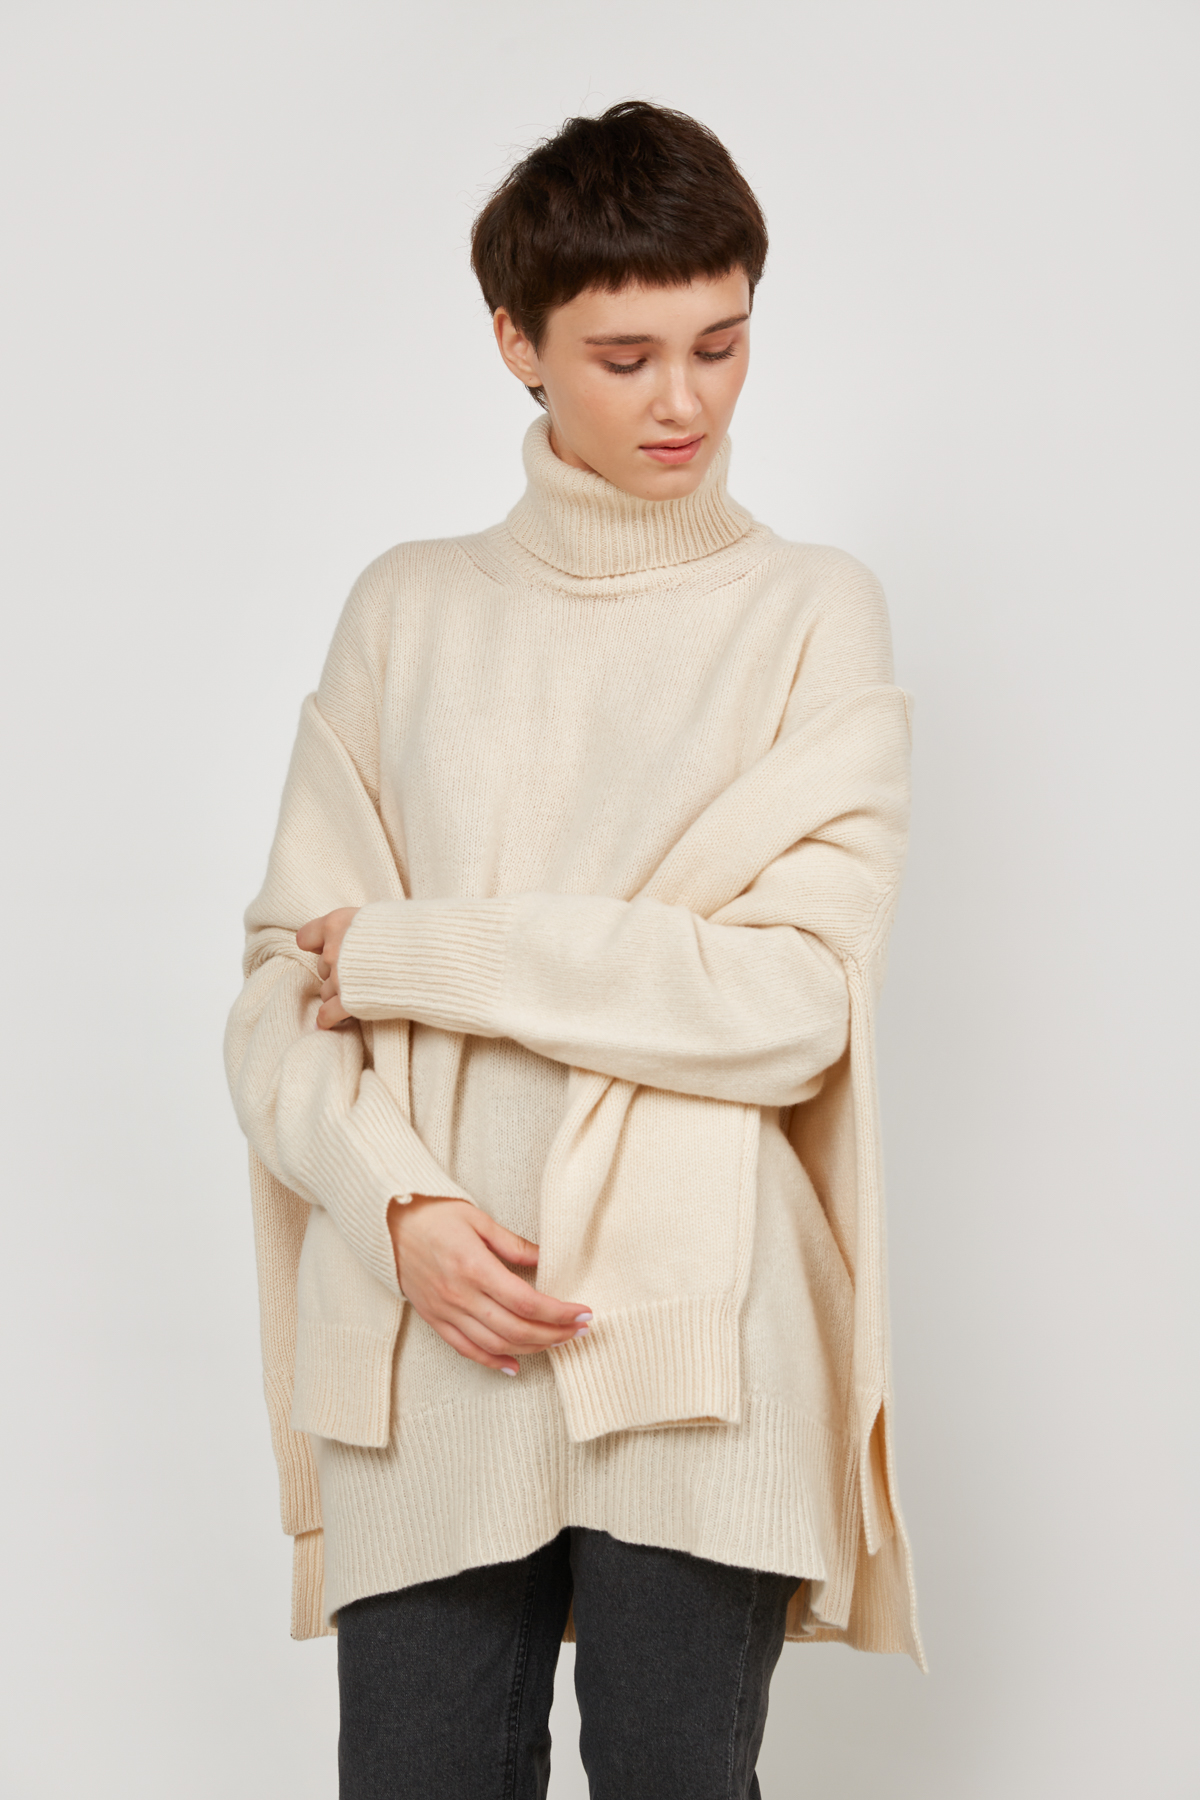 Cashmere milk knitted oversized sweater, photo 3